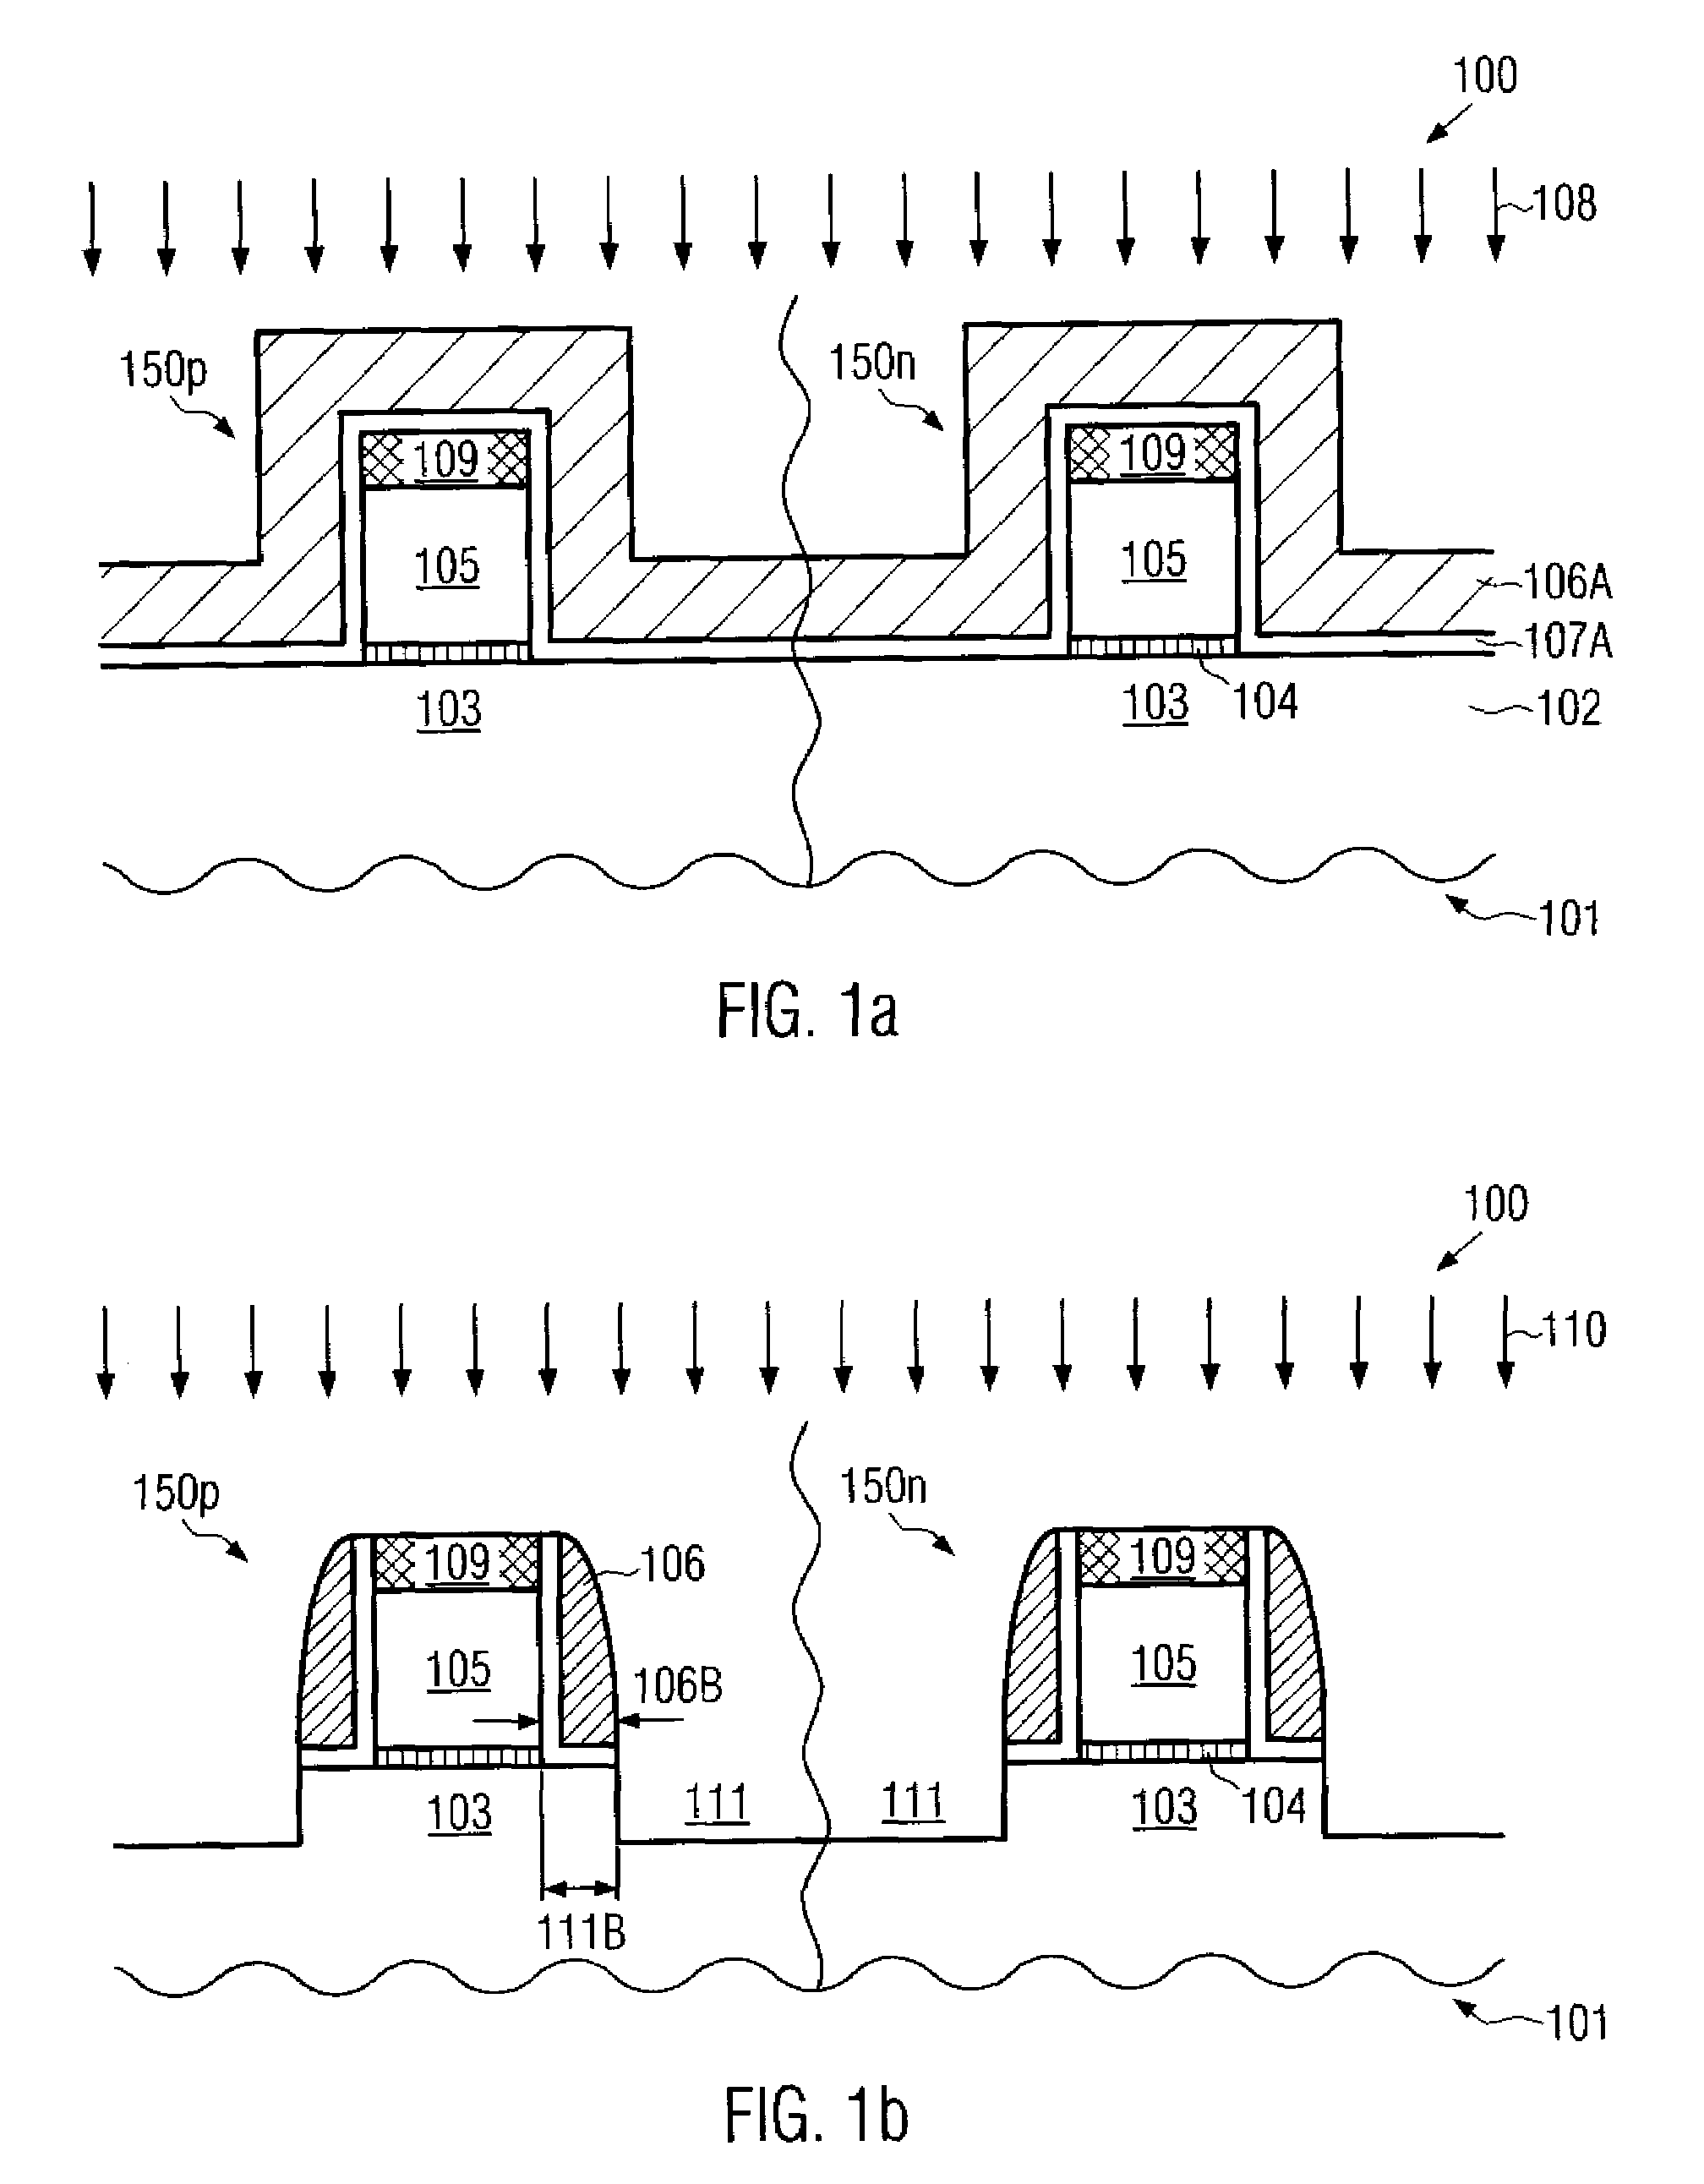 Different embedded strain layers in pmos and nmos transistors and a method of forming the same